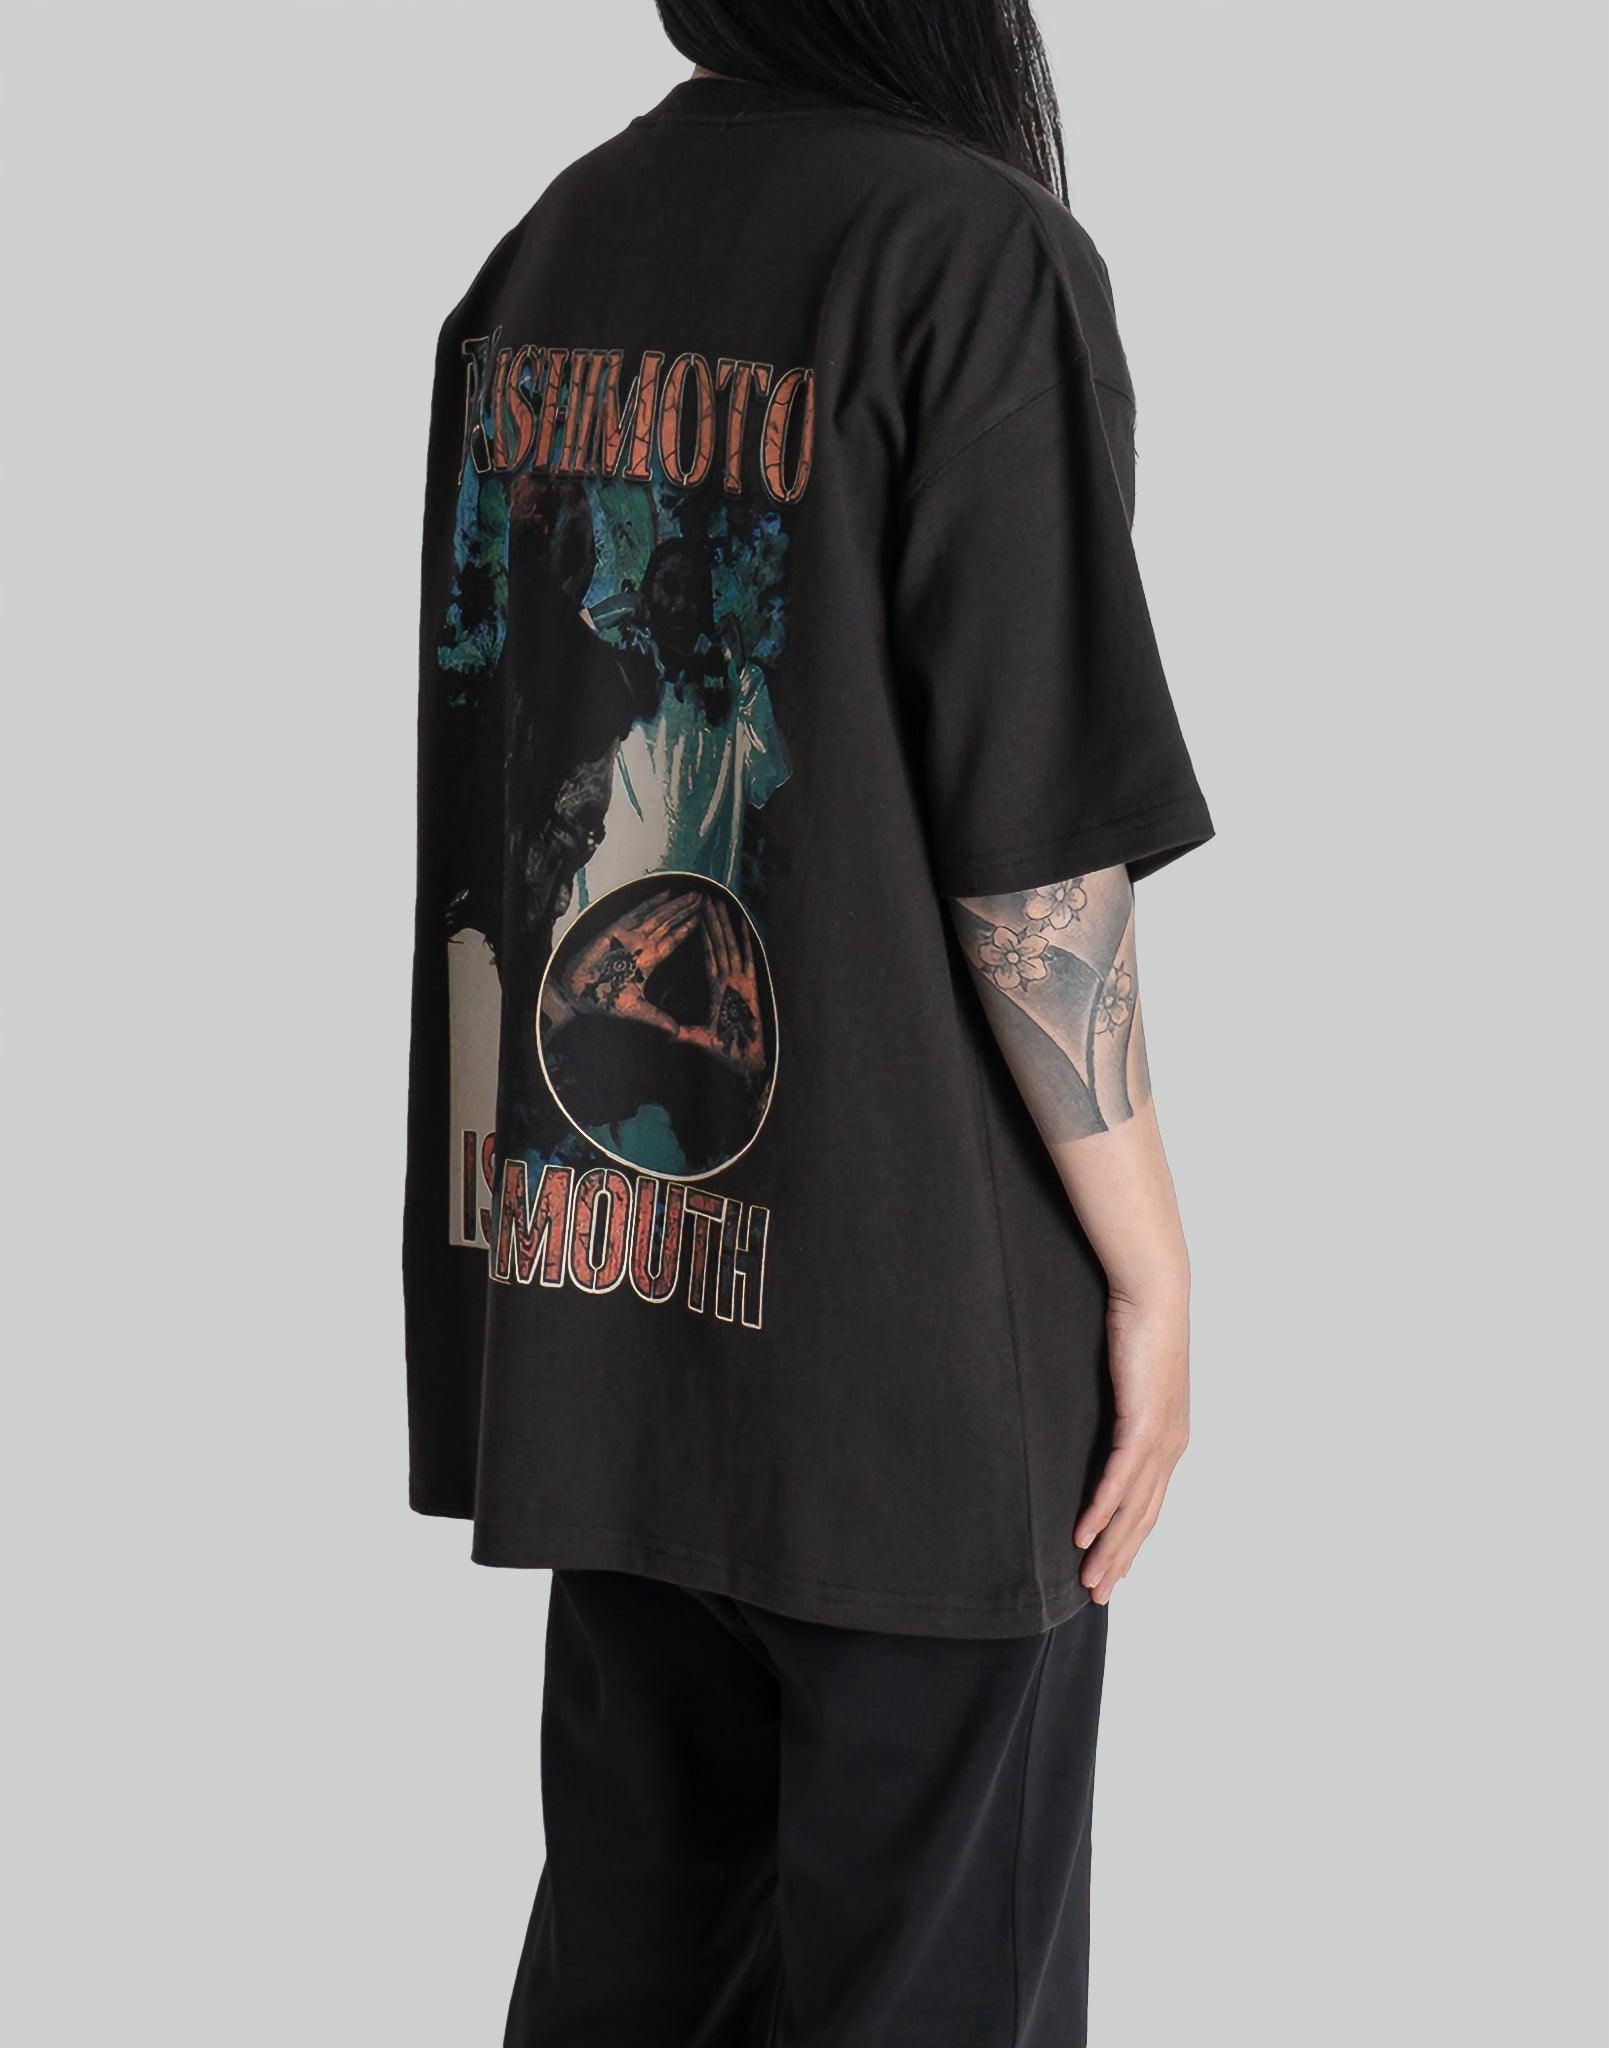 NISHIMOTO IS THE MOUTH RAP S/S TEE - 082plus